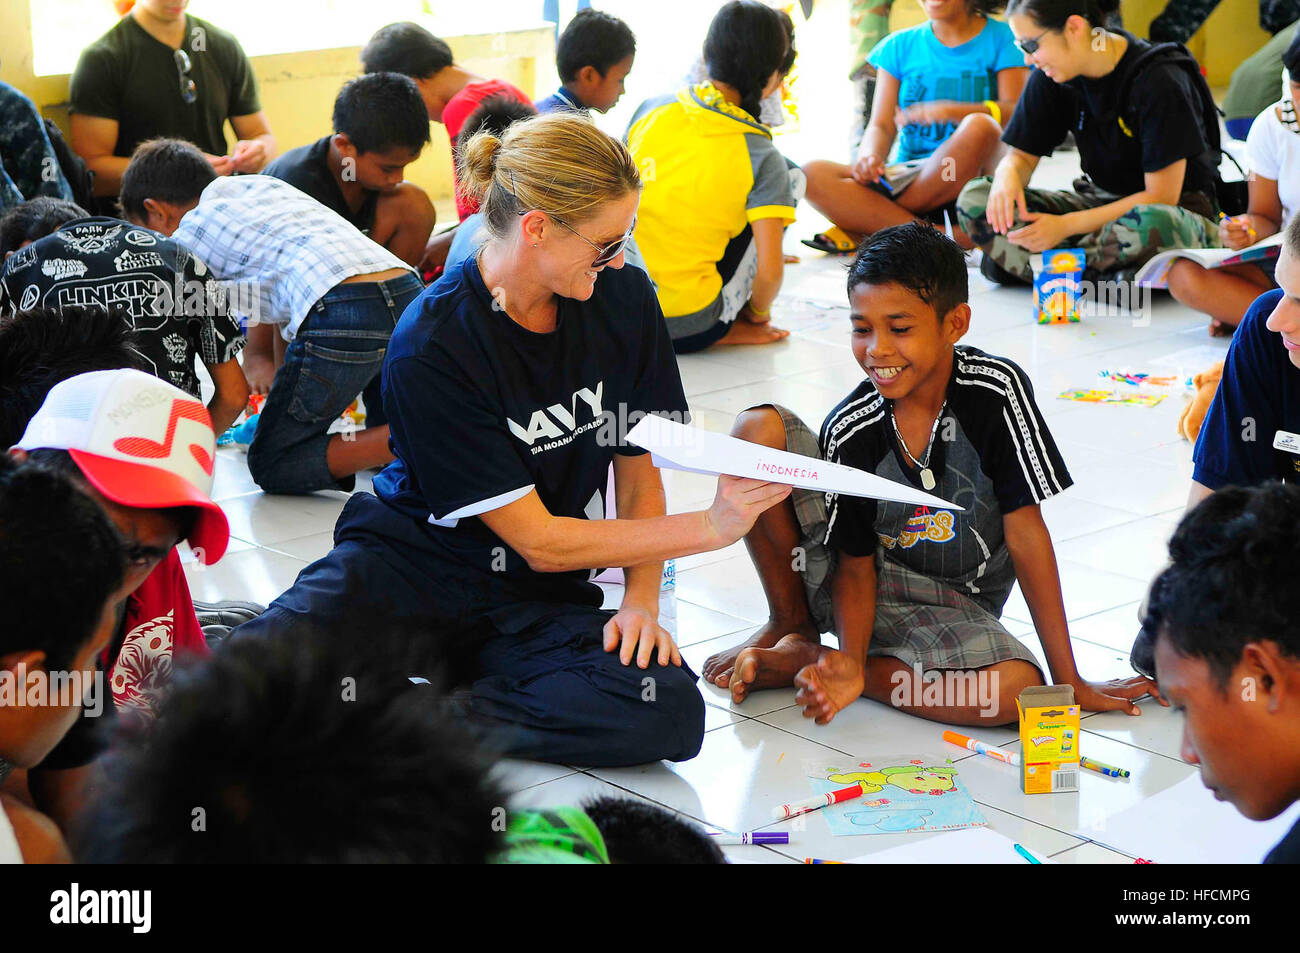 New Zealand Defense Force Lt. Cmdr. Kerry Climo, embarked aboard the Military Sealift Command hospital ship USNS Mercy, gives a boy a paper airplane she made while spending time with children at the Rumah Sejahtera Bagi Anak Orphanage during a Pacific Partnership 2010 community service event. Pacific Partnership 2010 is the fifth in a series of annual U.S. Pacific Fleet humanitarian and civic assistance endeavors to strengthen regional partnerships. Pacific Partnership 2010 action 300850 Stock Photo